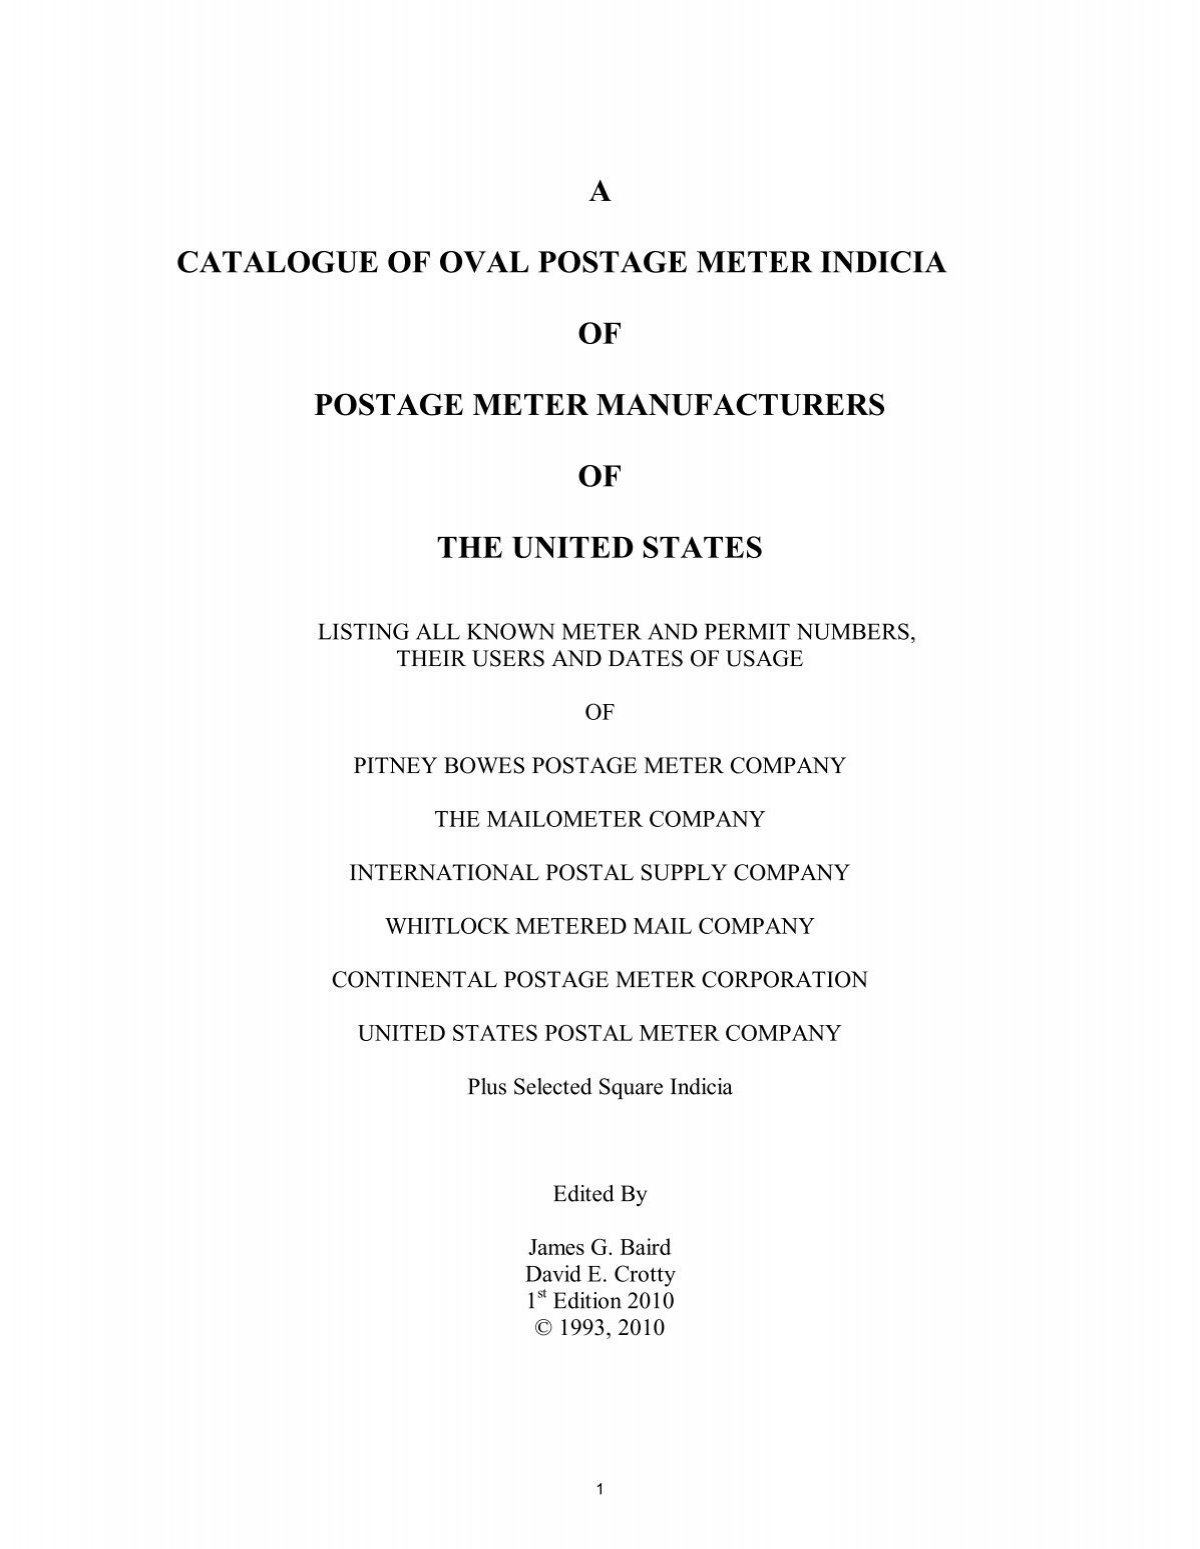 A CATALOGUE OF OVAL POSTAGE METER INDICIA OF POSTAGE